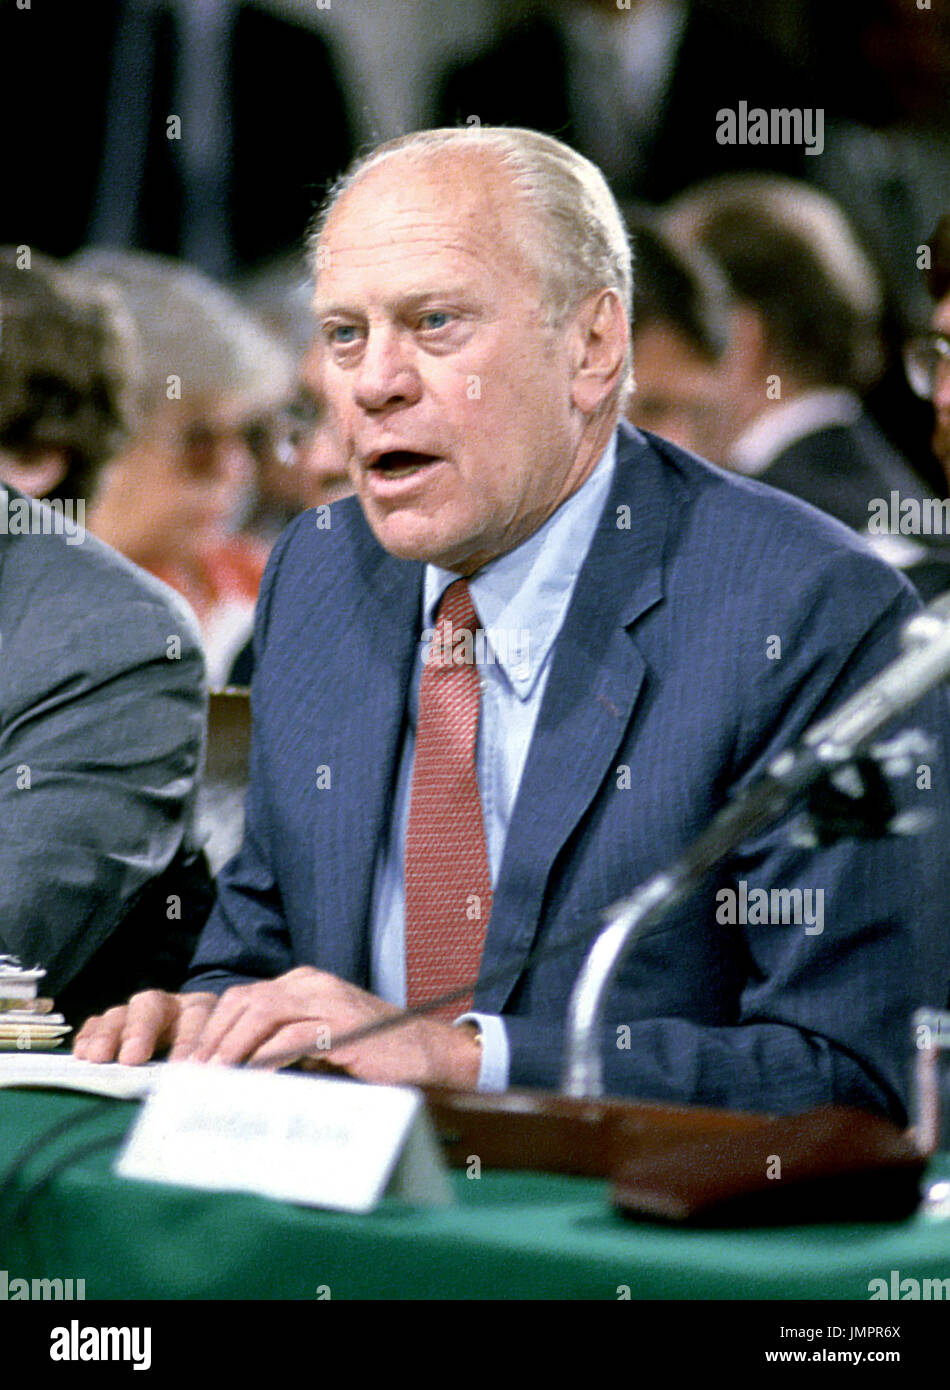 Washington, D.C. - September 15, 1987 -- Former United States President Gerald R. Ford introduces Judge Robert Bork to the United States Senate Judiciary Committee in Washington, D.C. on September 15, 1987.  Bork was standing as President Ronald Reagan's nominee to be Associate Justice of the United States Supreme Court Credit: Arnie Sachs - CNP Stock Photo